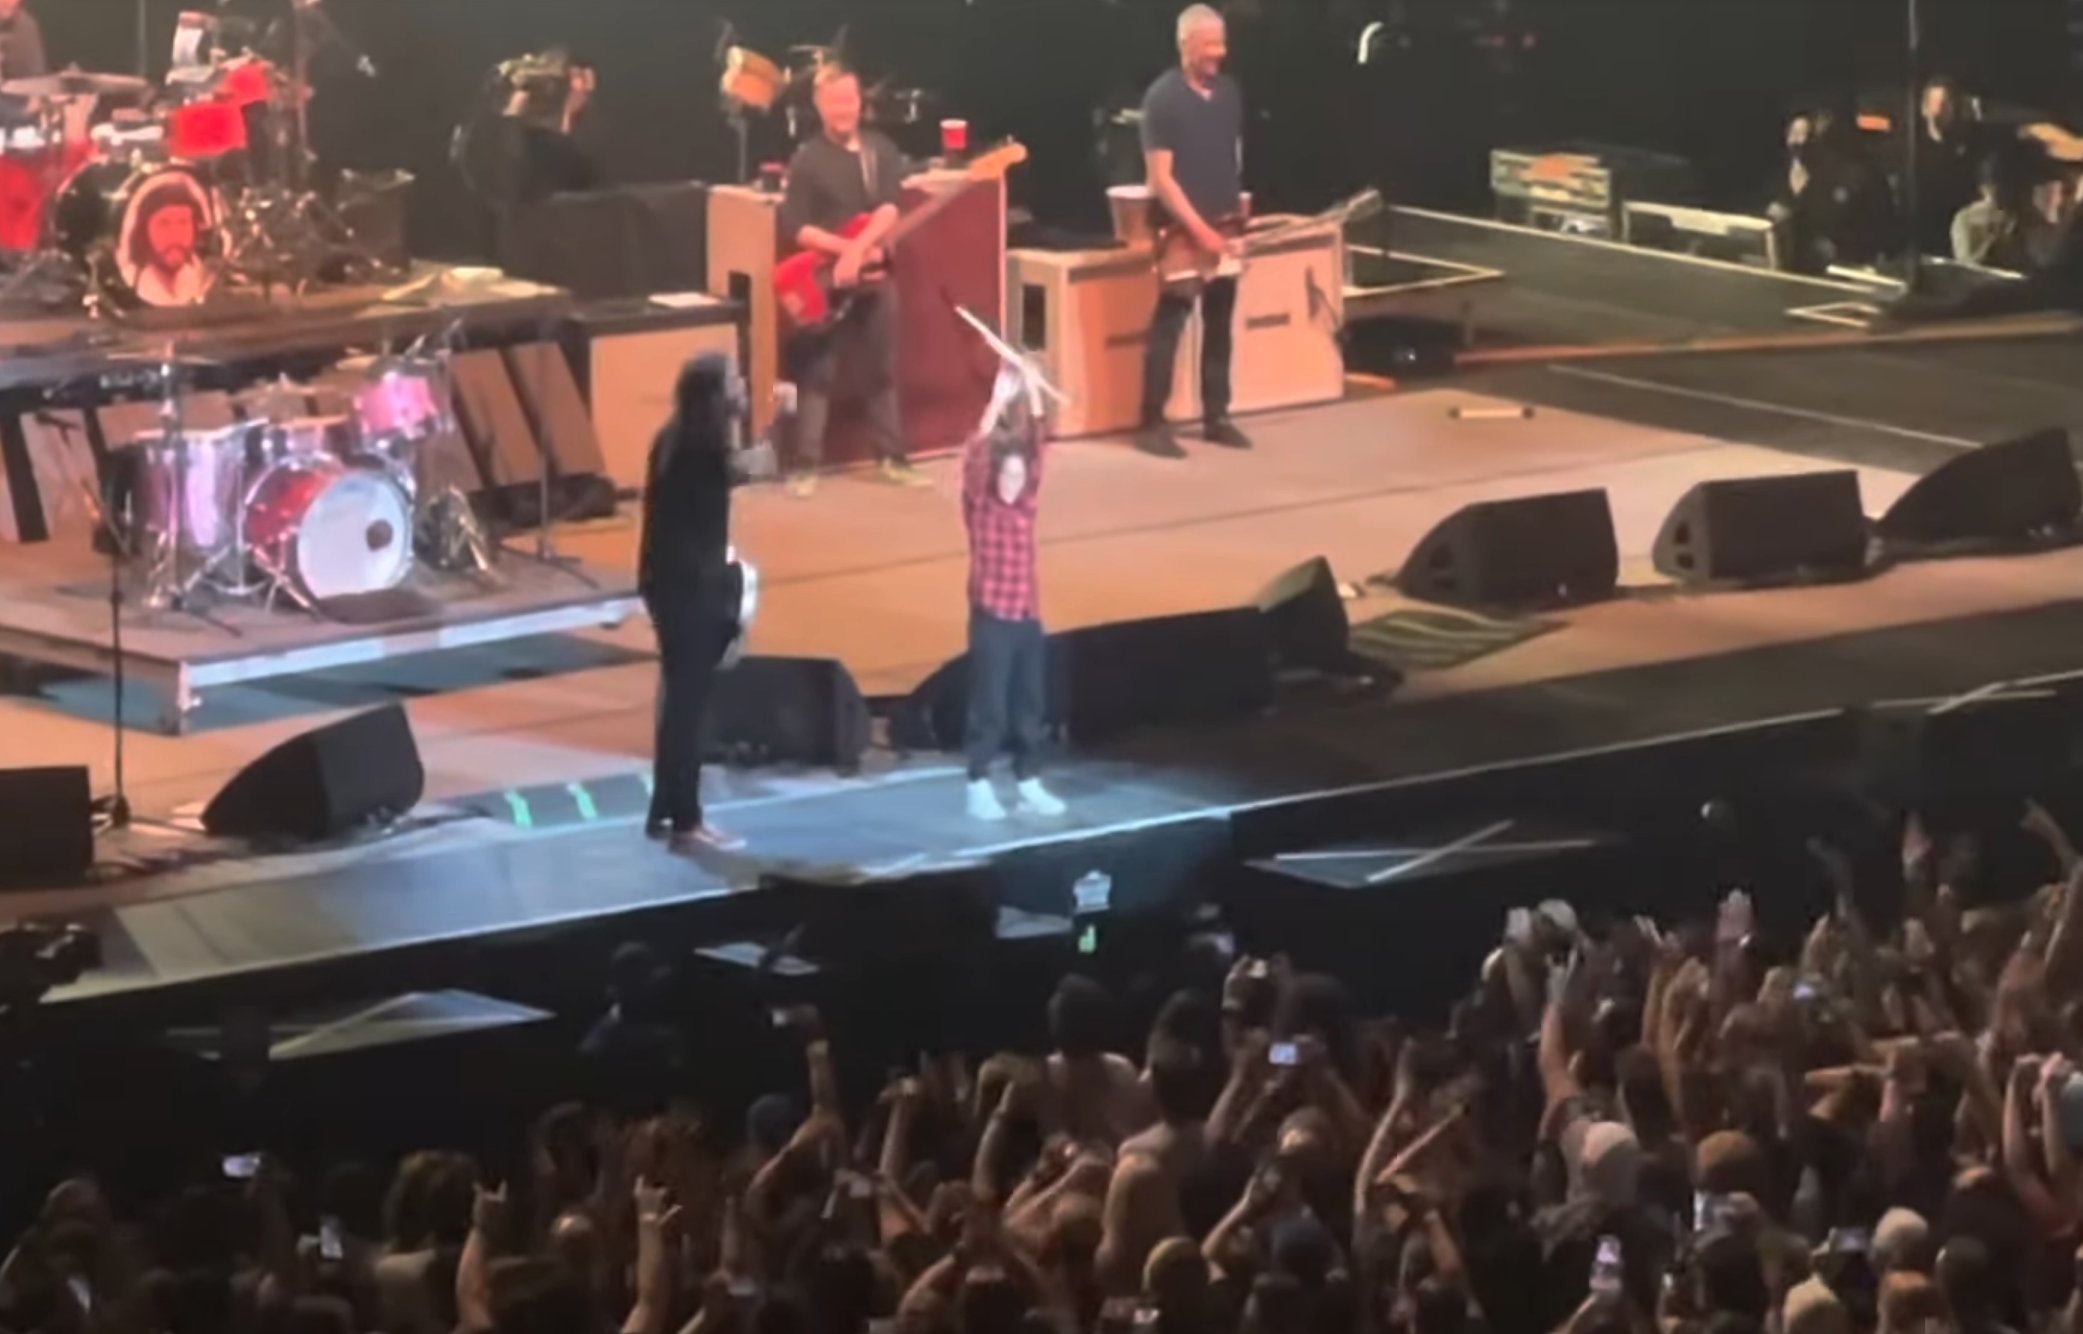 Watch Jack Black Sing AC/DC's 'Big Balls' With Foo Fighters